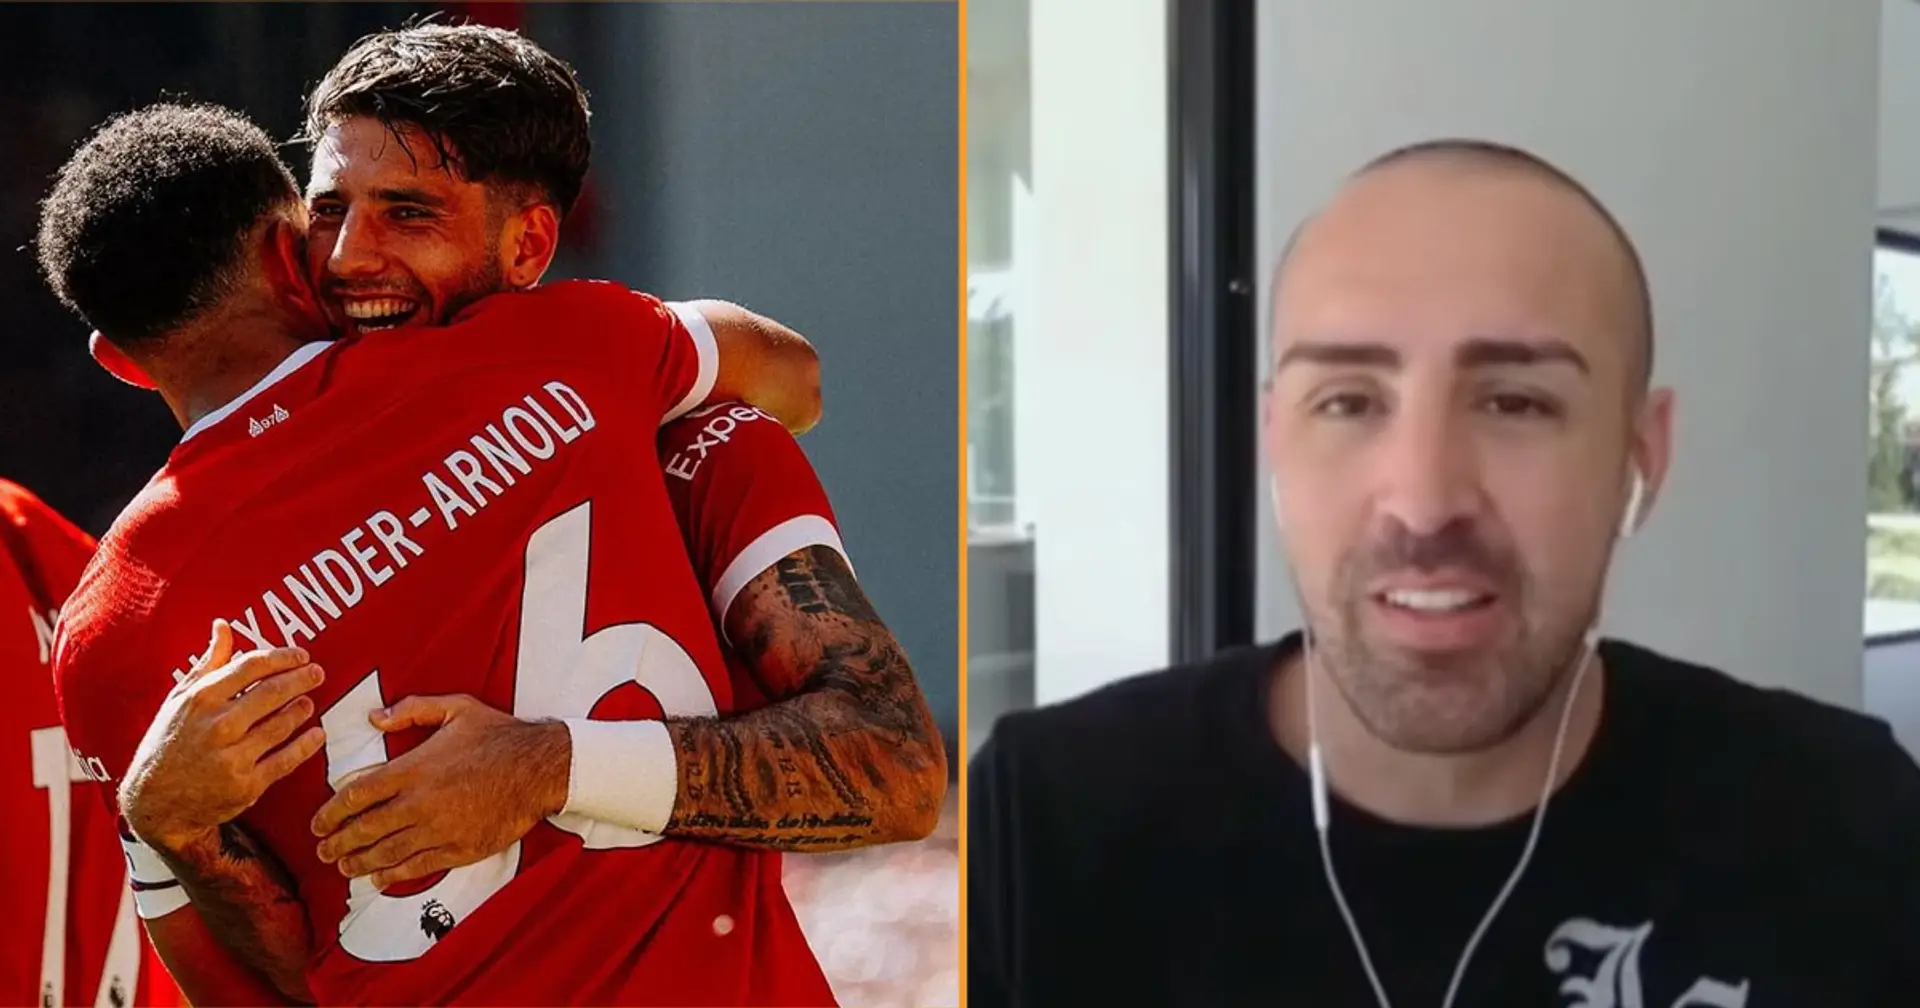 Jose Enrique names 3 favourite Liverpool players right now - one 'isn't playing at his prime level'